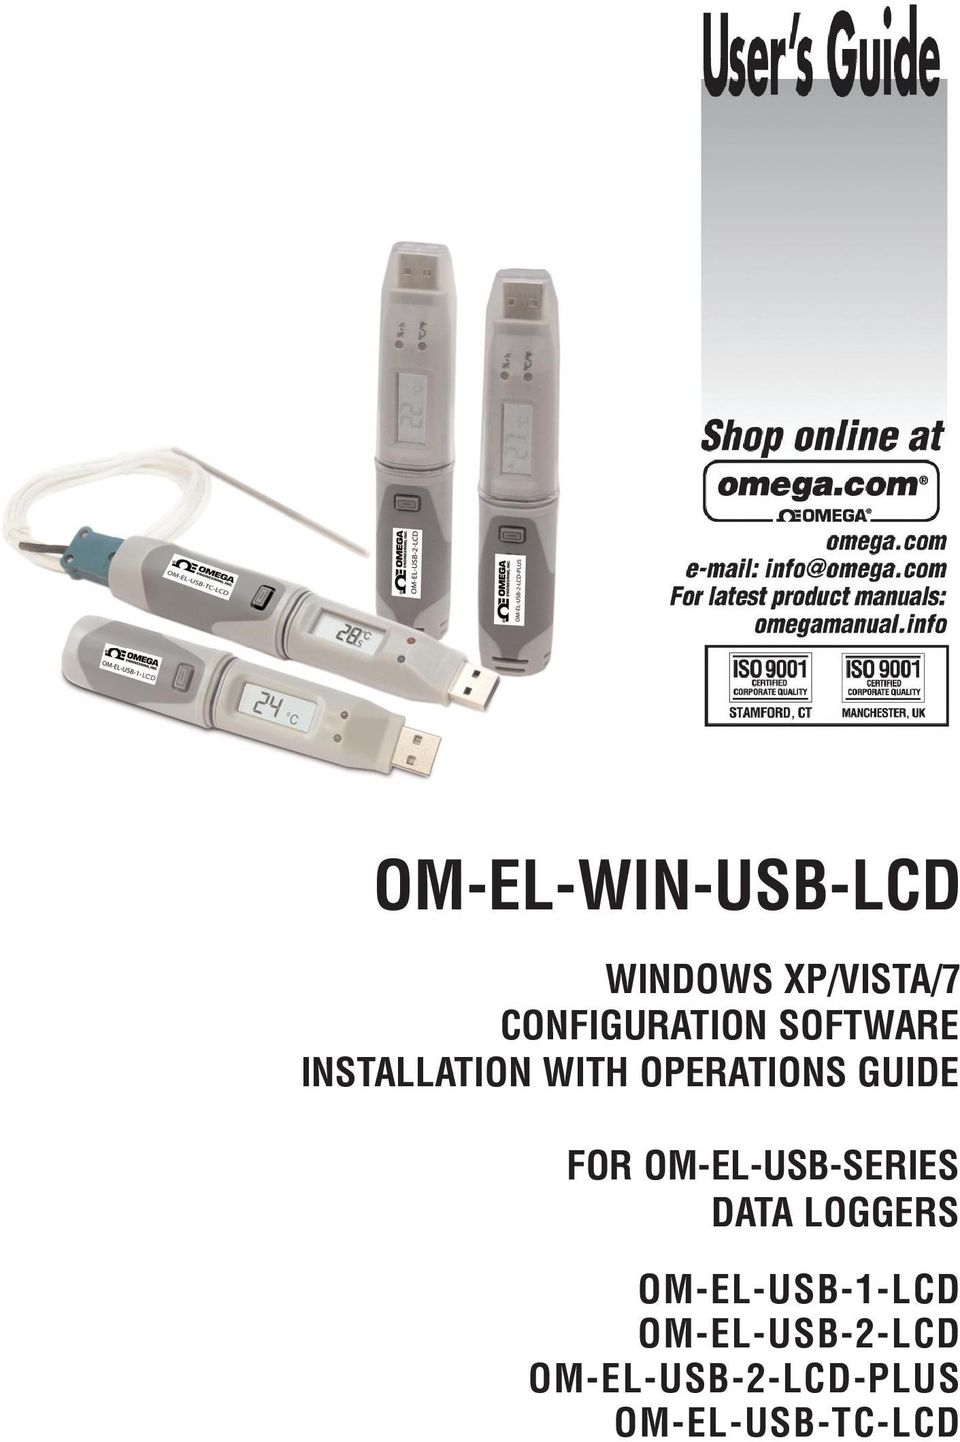 OPERATIONS GUIDE FOR OM-EL-USB-SERIES DATA